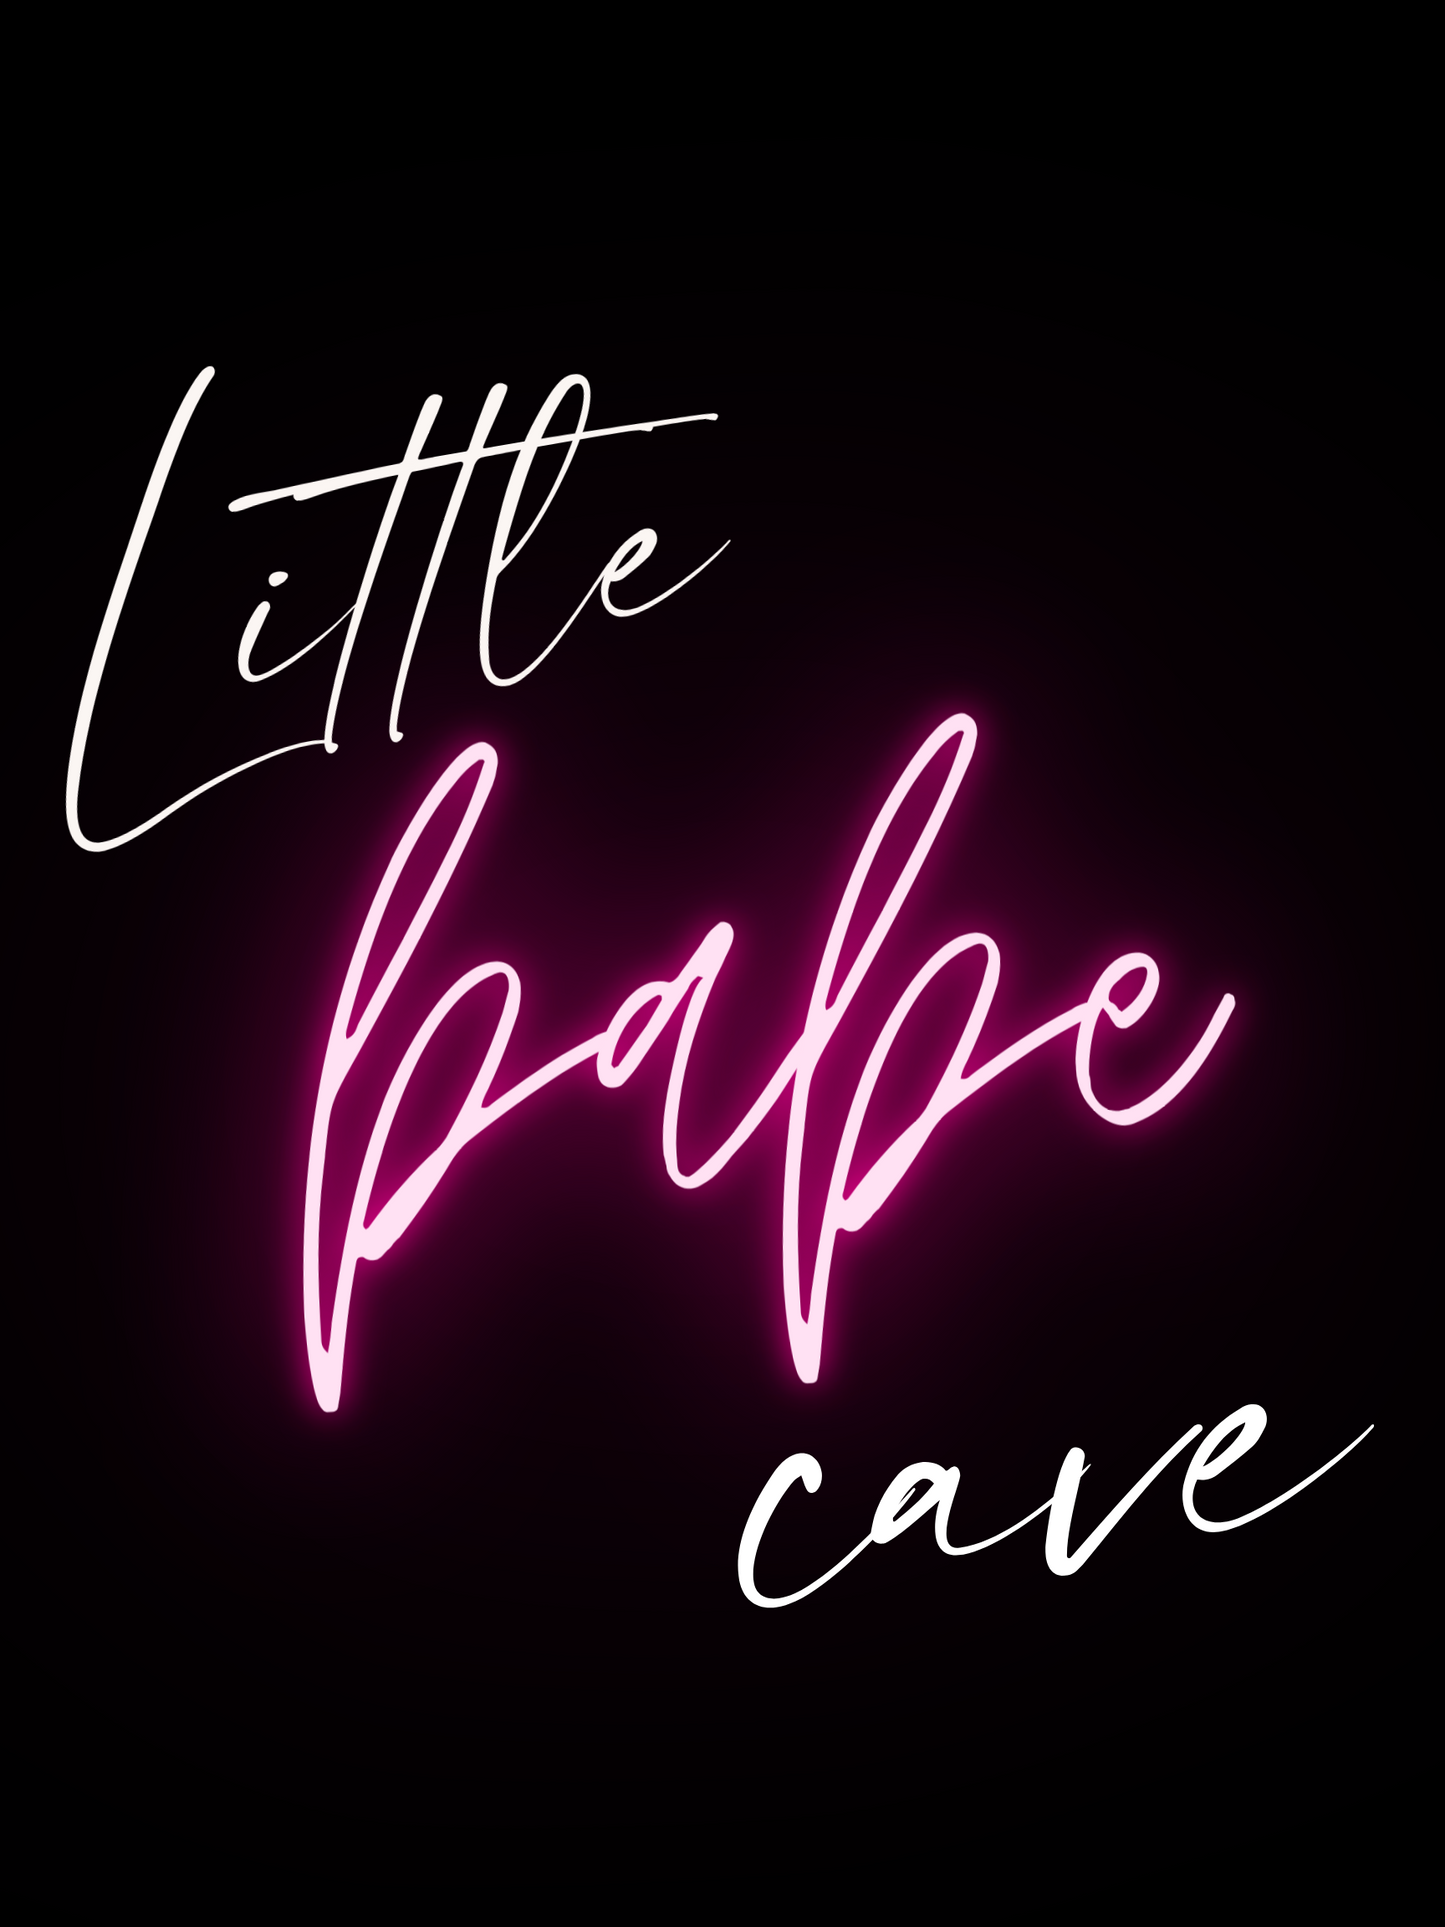 Little Babe Cave 4pc Digital Poster Download